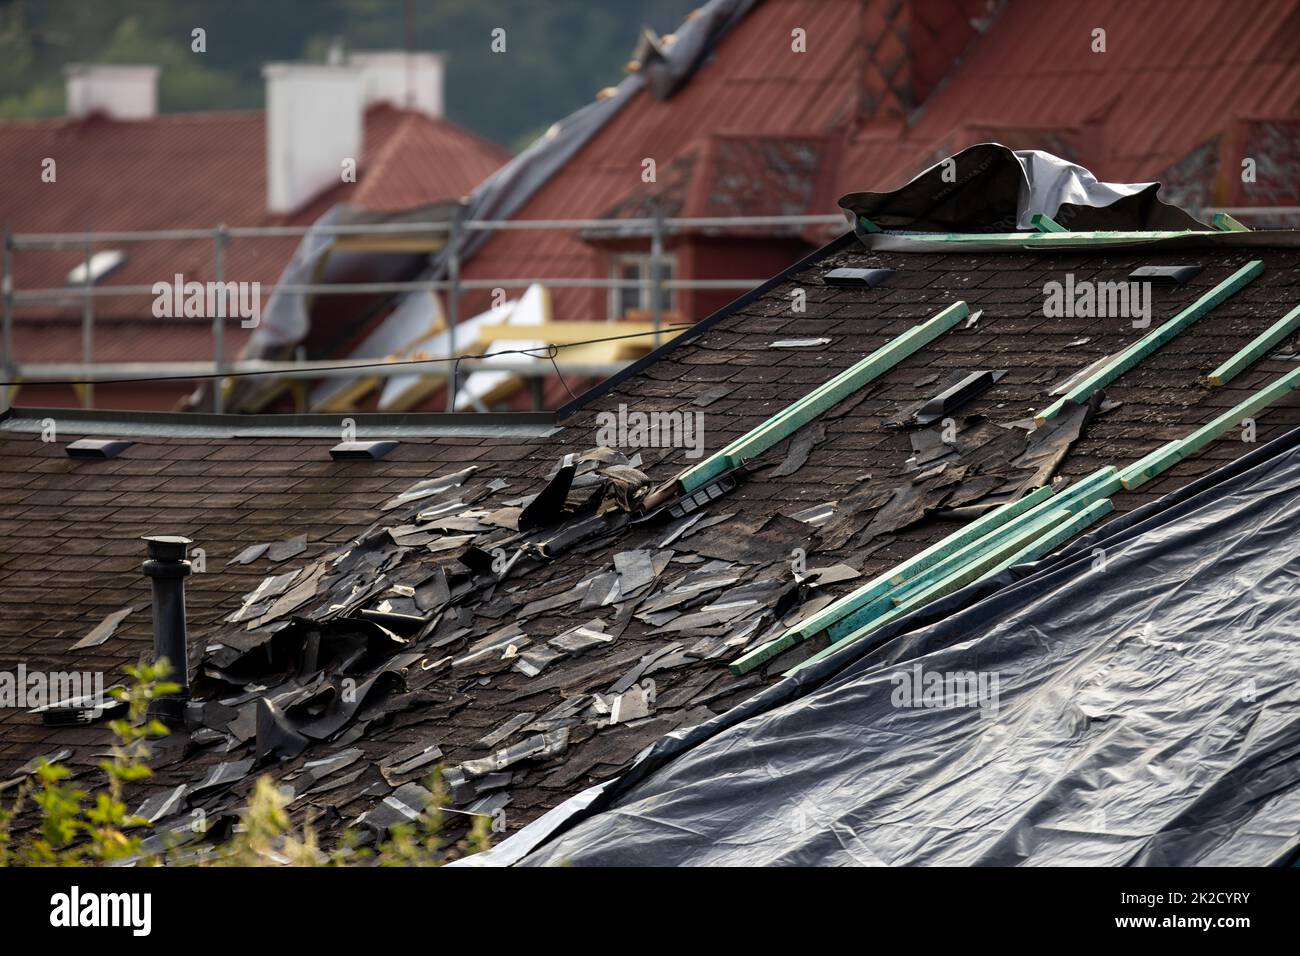 Storm damaged roof, destroyed roof tiles, expensive damage needing prompt repair Stock Photo